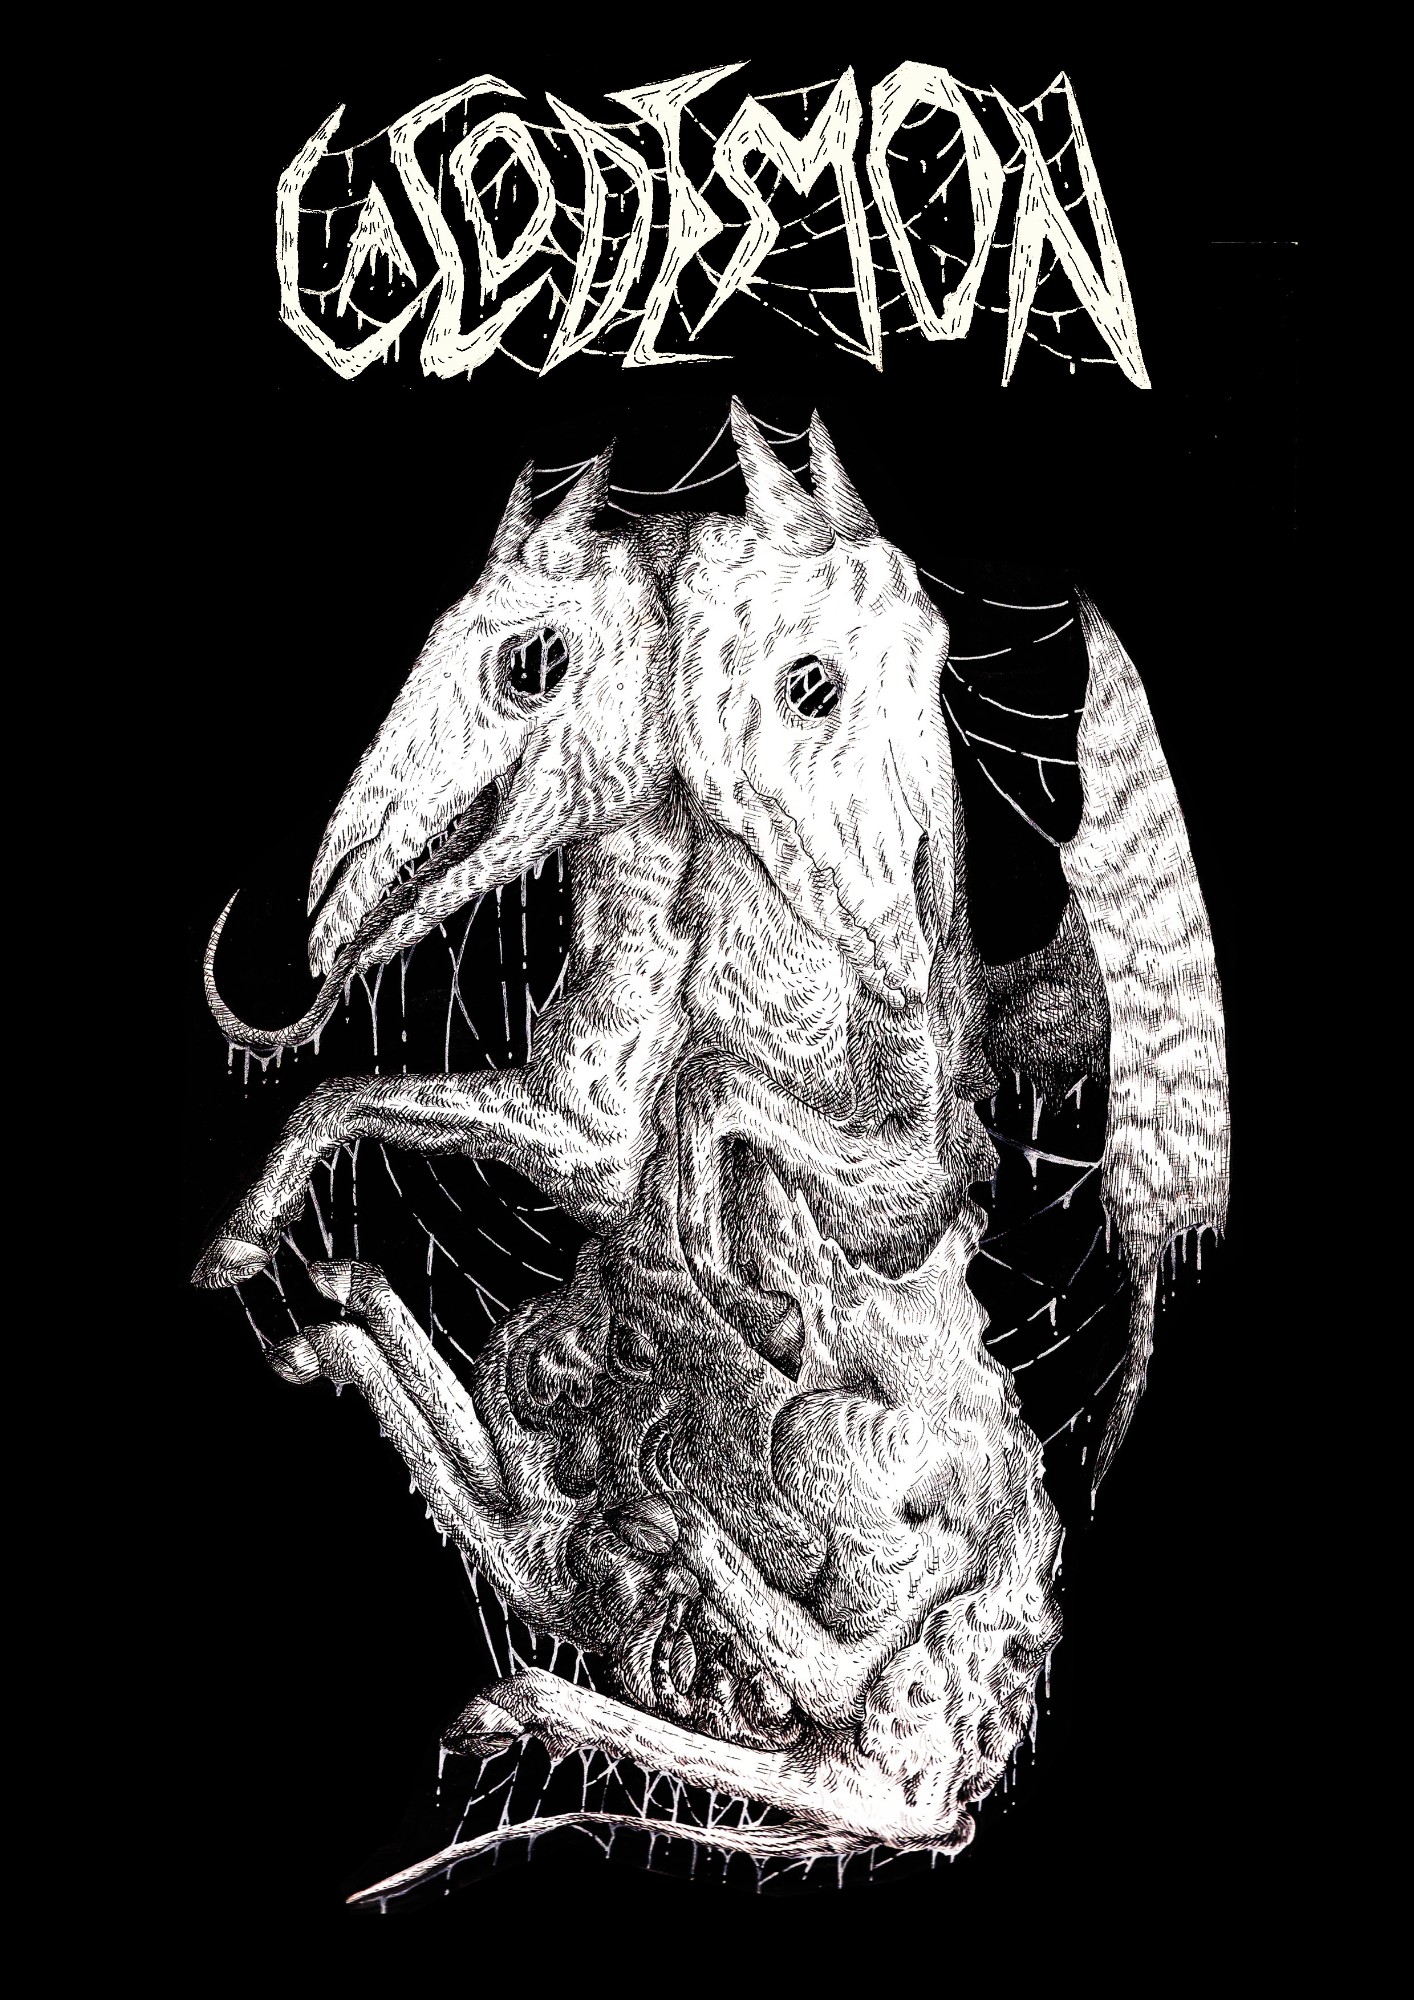 Band shirt design in response to the word prompt "cacodemon". Pen/ink, photoshop.